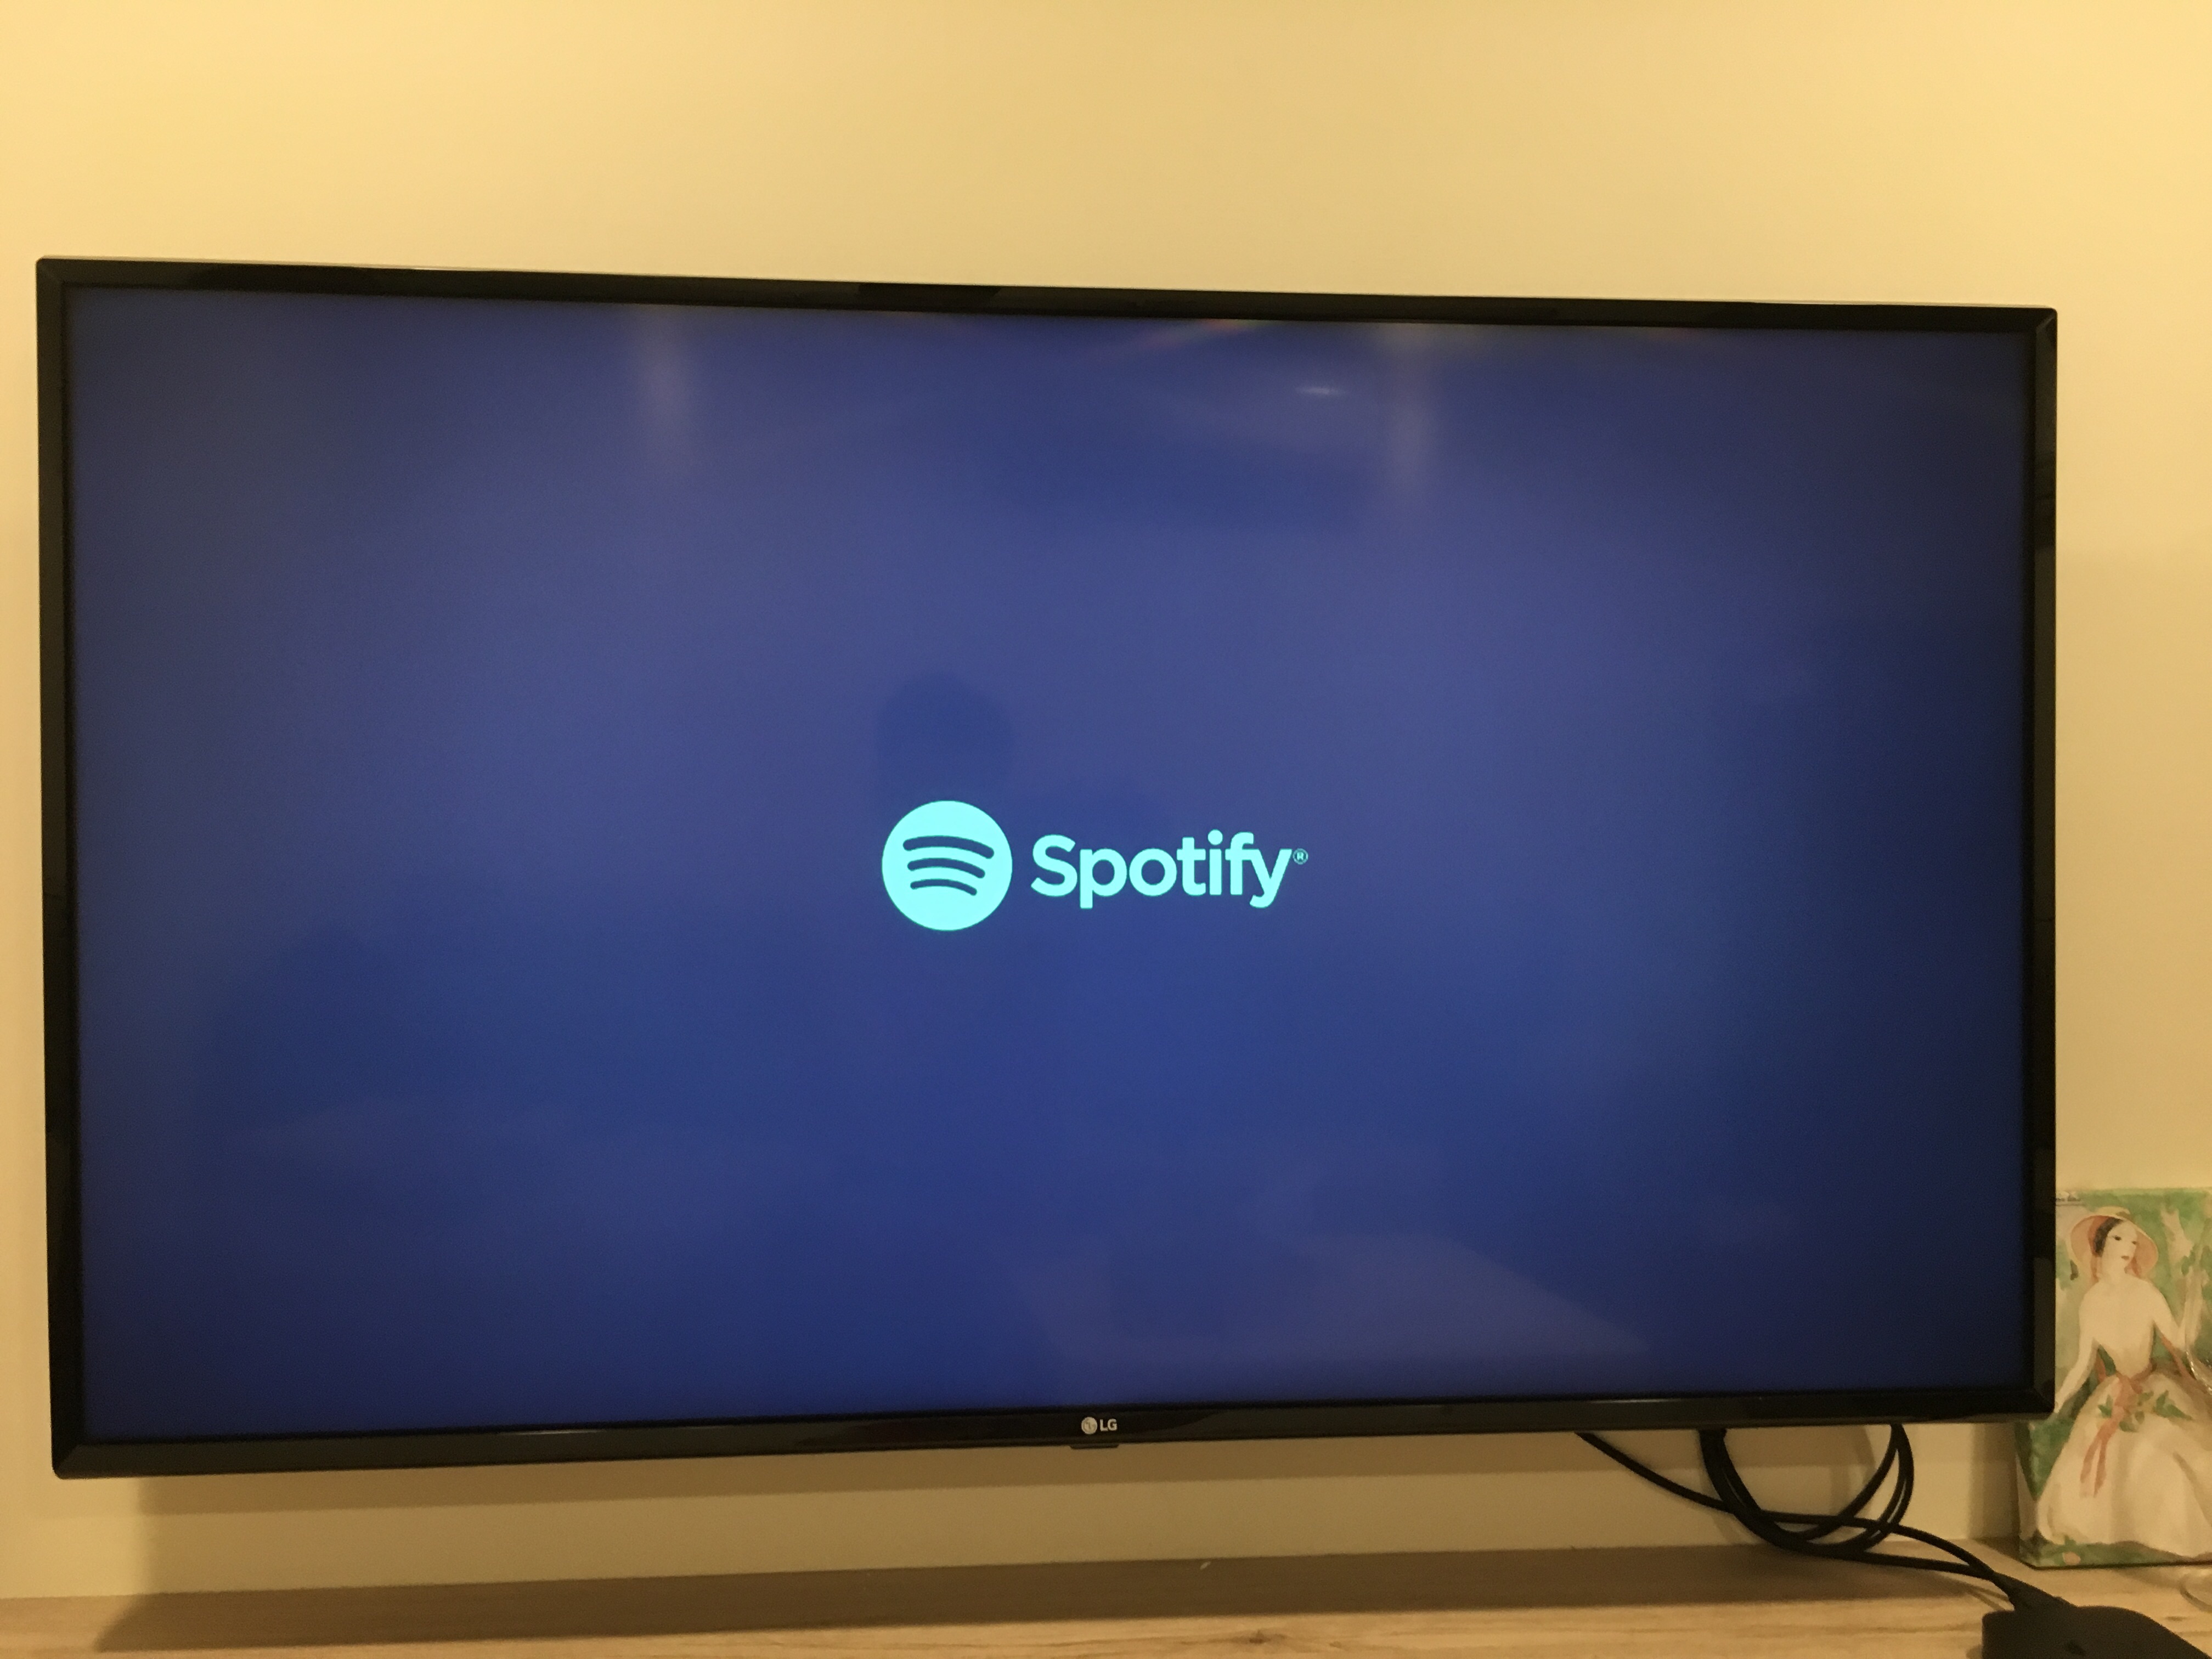 How do i download spotify on my lg smart tv screen